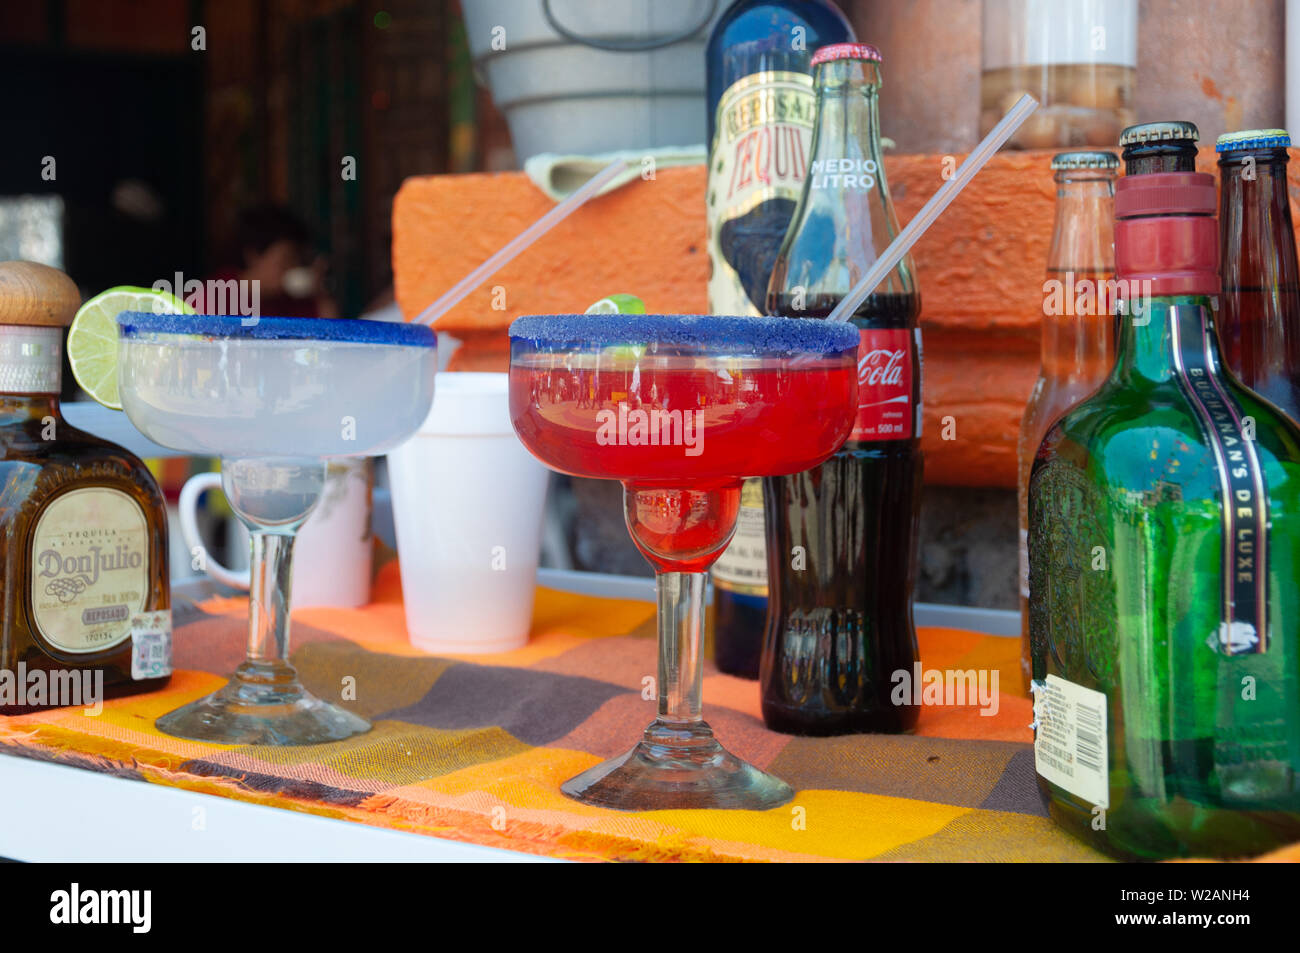 Tijuana, Mexico - AUGUST 2, 2012 - Food and drinks at Border of the United States and Mexico in San Diego, California Stock Photo